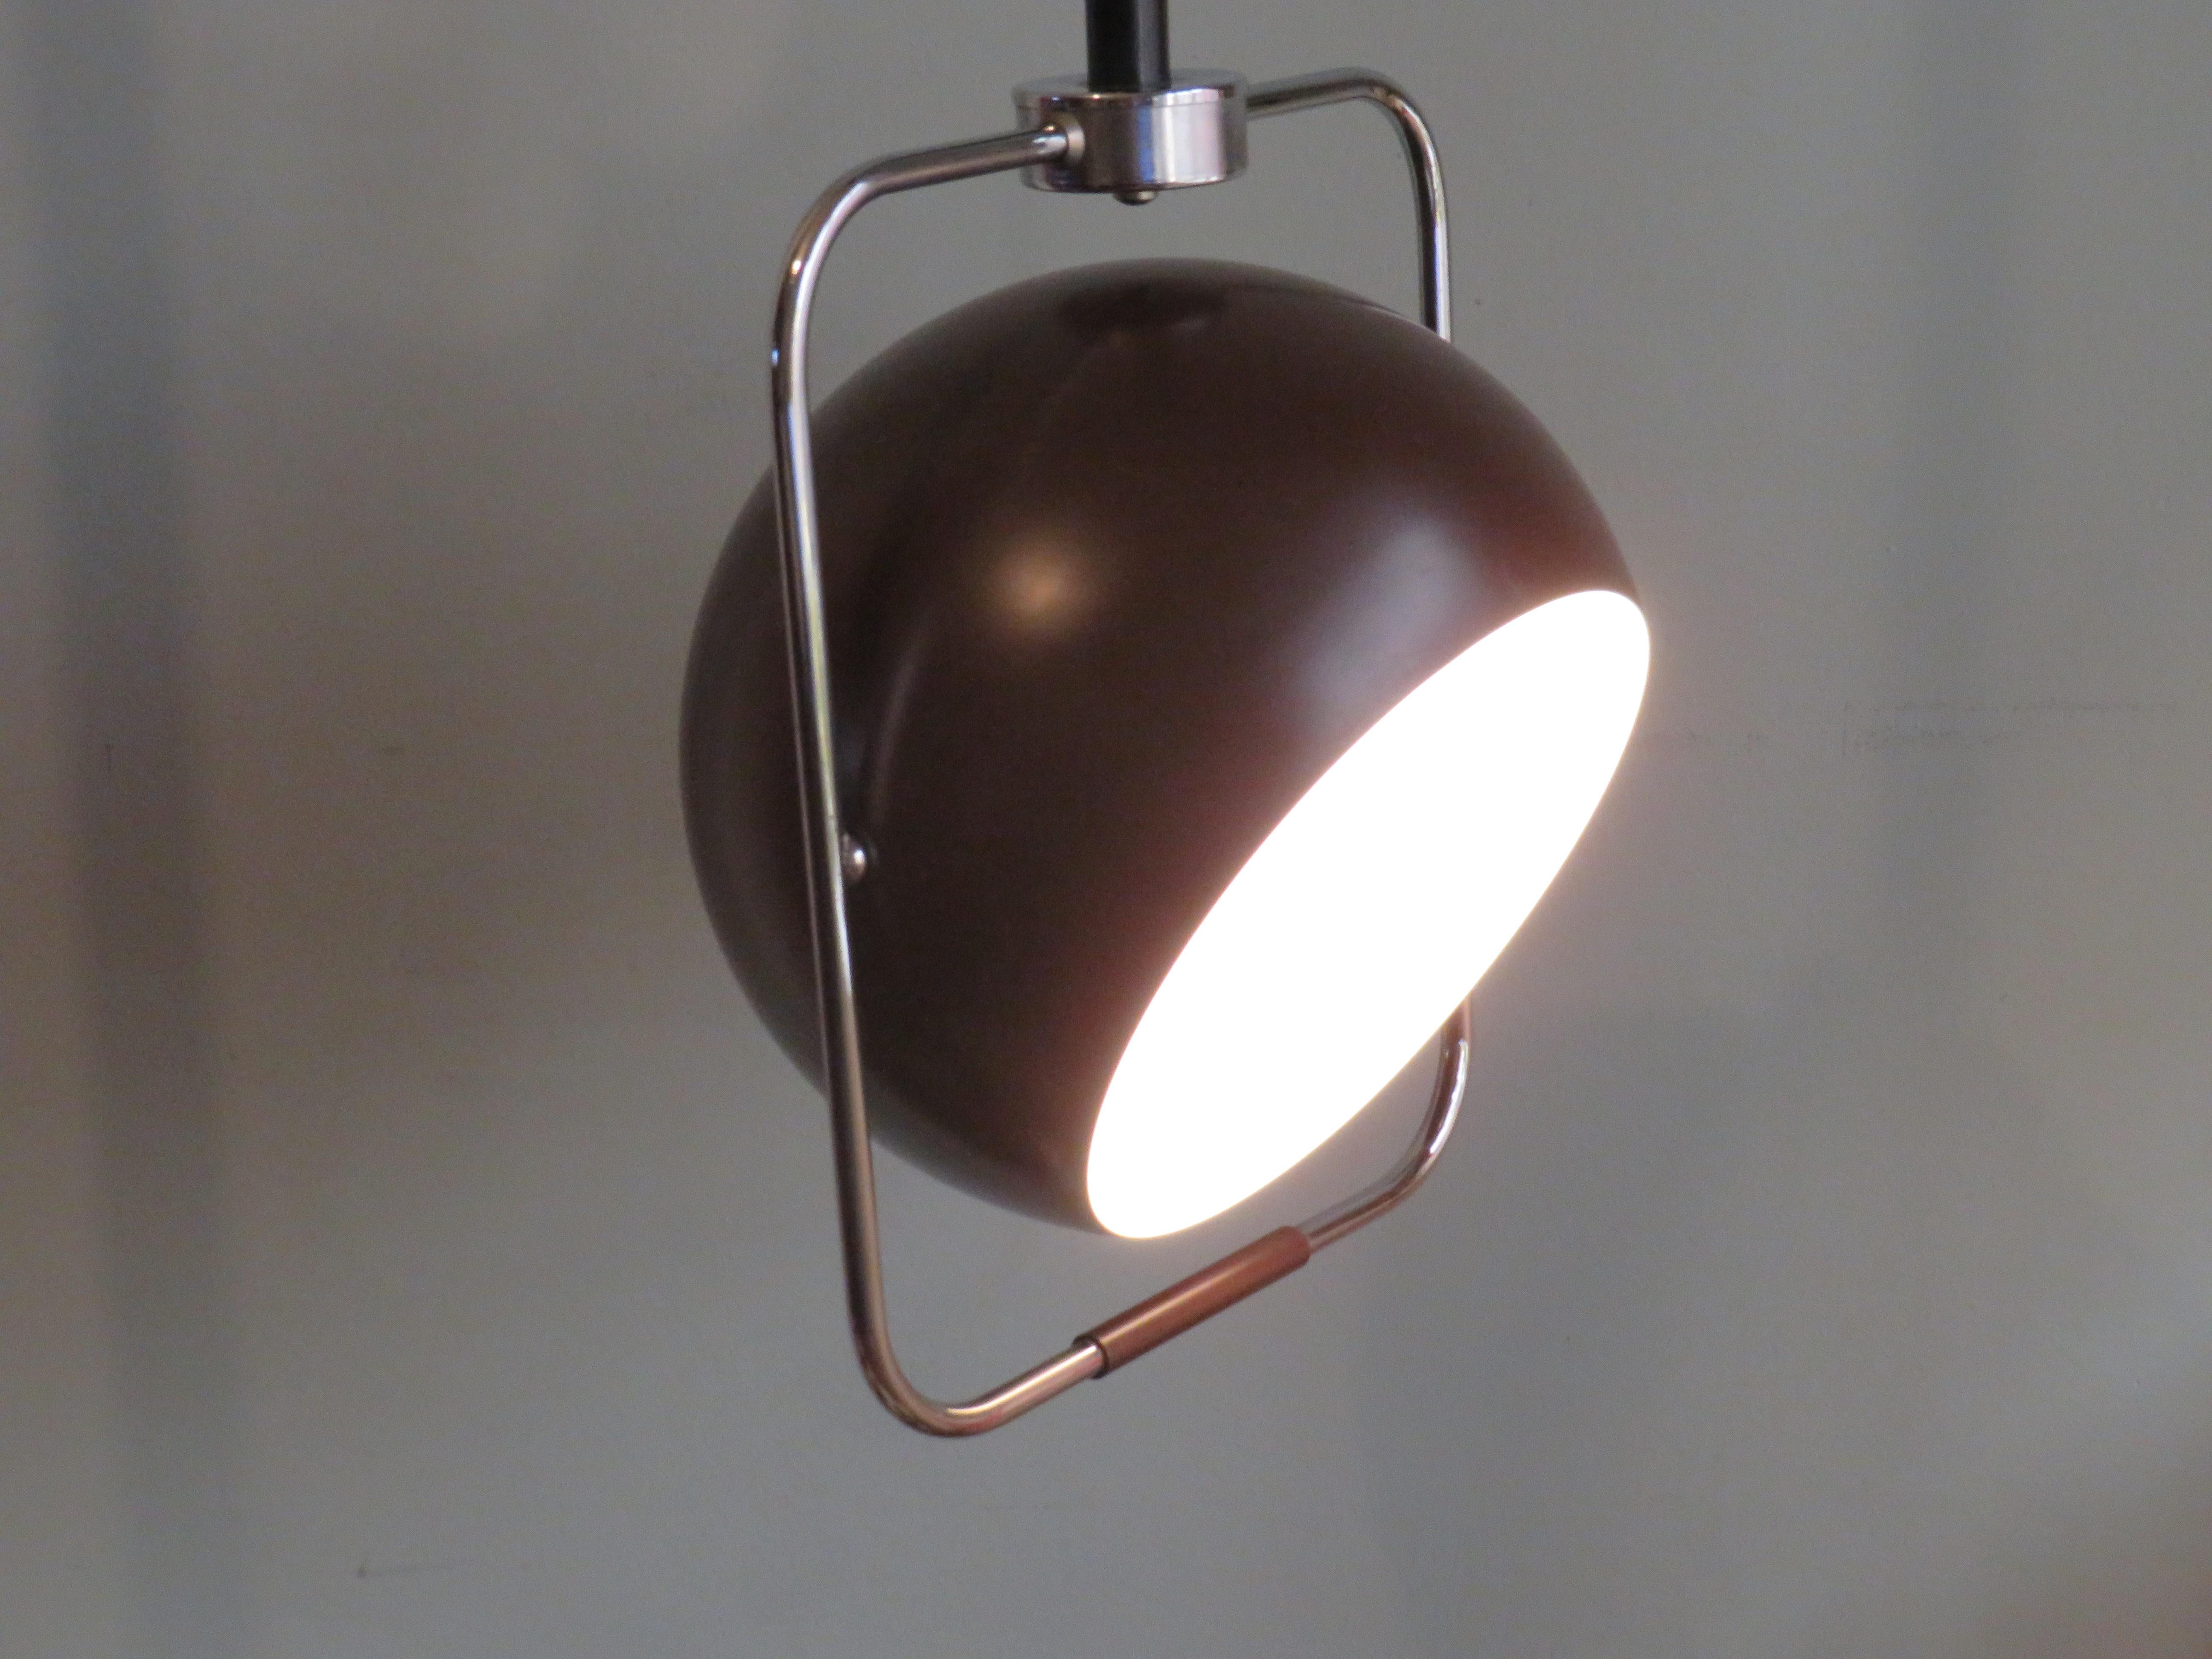 Brown lacquered metal spherical hanging lamp with white lacquered interior in a rectangular chrome frame.
The lamp can be pulled down by the brown plastic handle at the bottom of the chrome frame.
The bulb can also be brought into the desired